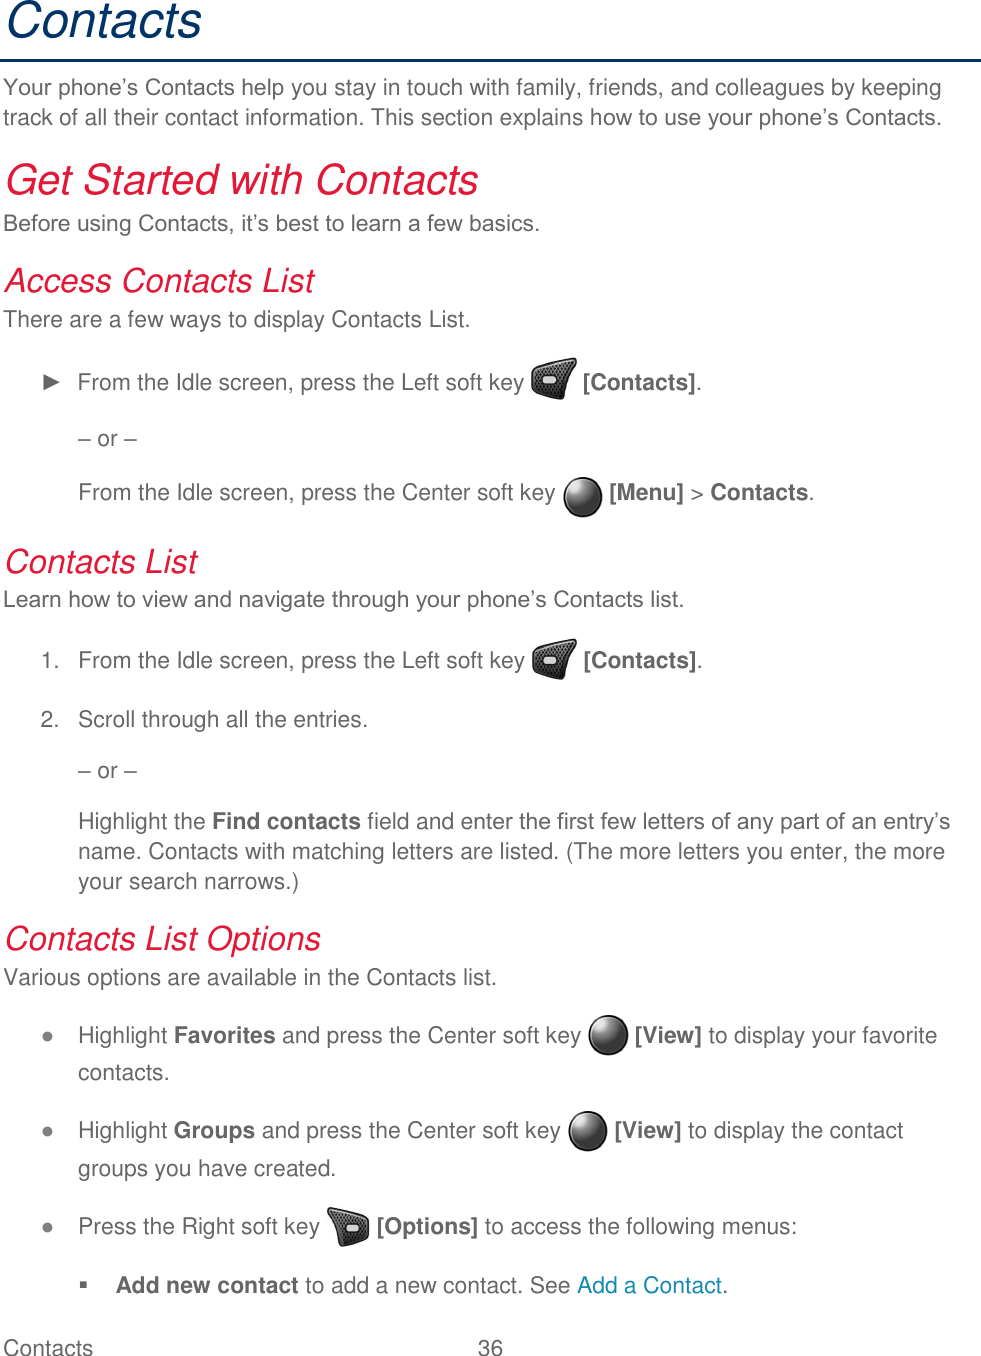 Contacts  36   Contacts Your phone’s Contacts help you stay in touch with family, friends, and colleagues by keeping track of all their contact information. This section explains how to use your phone’s Contacts. Get Started with Contacts  Before using Contacts, it’s best to learn a few basics.  Access Contacts List There are a few ways to display Contacts List. ►  From the Idle screen, press the Left soft key   [Contacts]. – or – From the Idle screen, press the Center soft key   [Menu] &gt; Contacts. Contacts List Learn how to view and navigate through your phone’s Contacts list.   From the Idle screen, press the Left soft key   [Contacts]. 1.  Scroll through all the entries. 2.– or – Highlight the Find contacts field and enter the first few letters of any part of an entry’s name. Contacts with matching letters are listed. (The more letters you enter, the more your search narrows.) Contacts List Options Various options are available in the Contacts list. ● Highlight Favorites and press the Center soft key   [View] to display your favorite contacts. ● Highlight Groups and press the Center soft key   [View] to display the contact groups you have created. ● Press the Right soft key   [Options] to access the following menus:  Add new contact to add a new contact. See Add a Contact. 